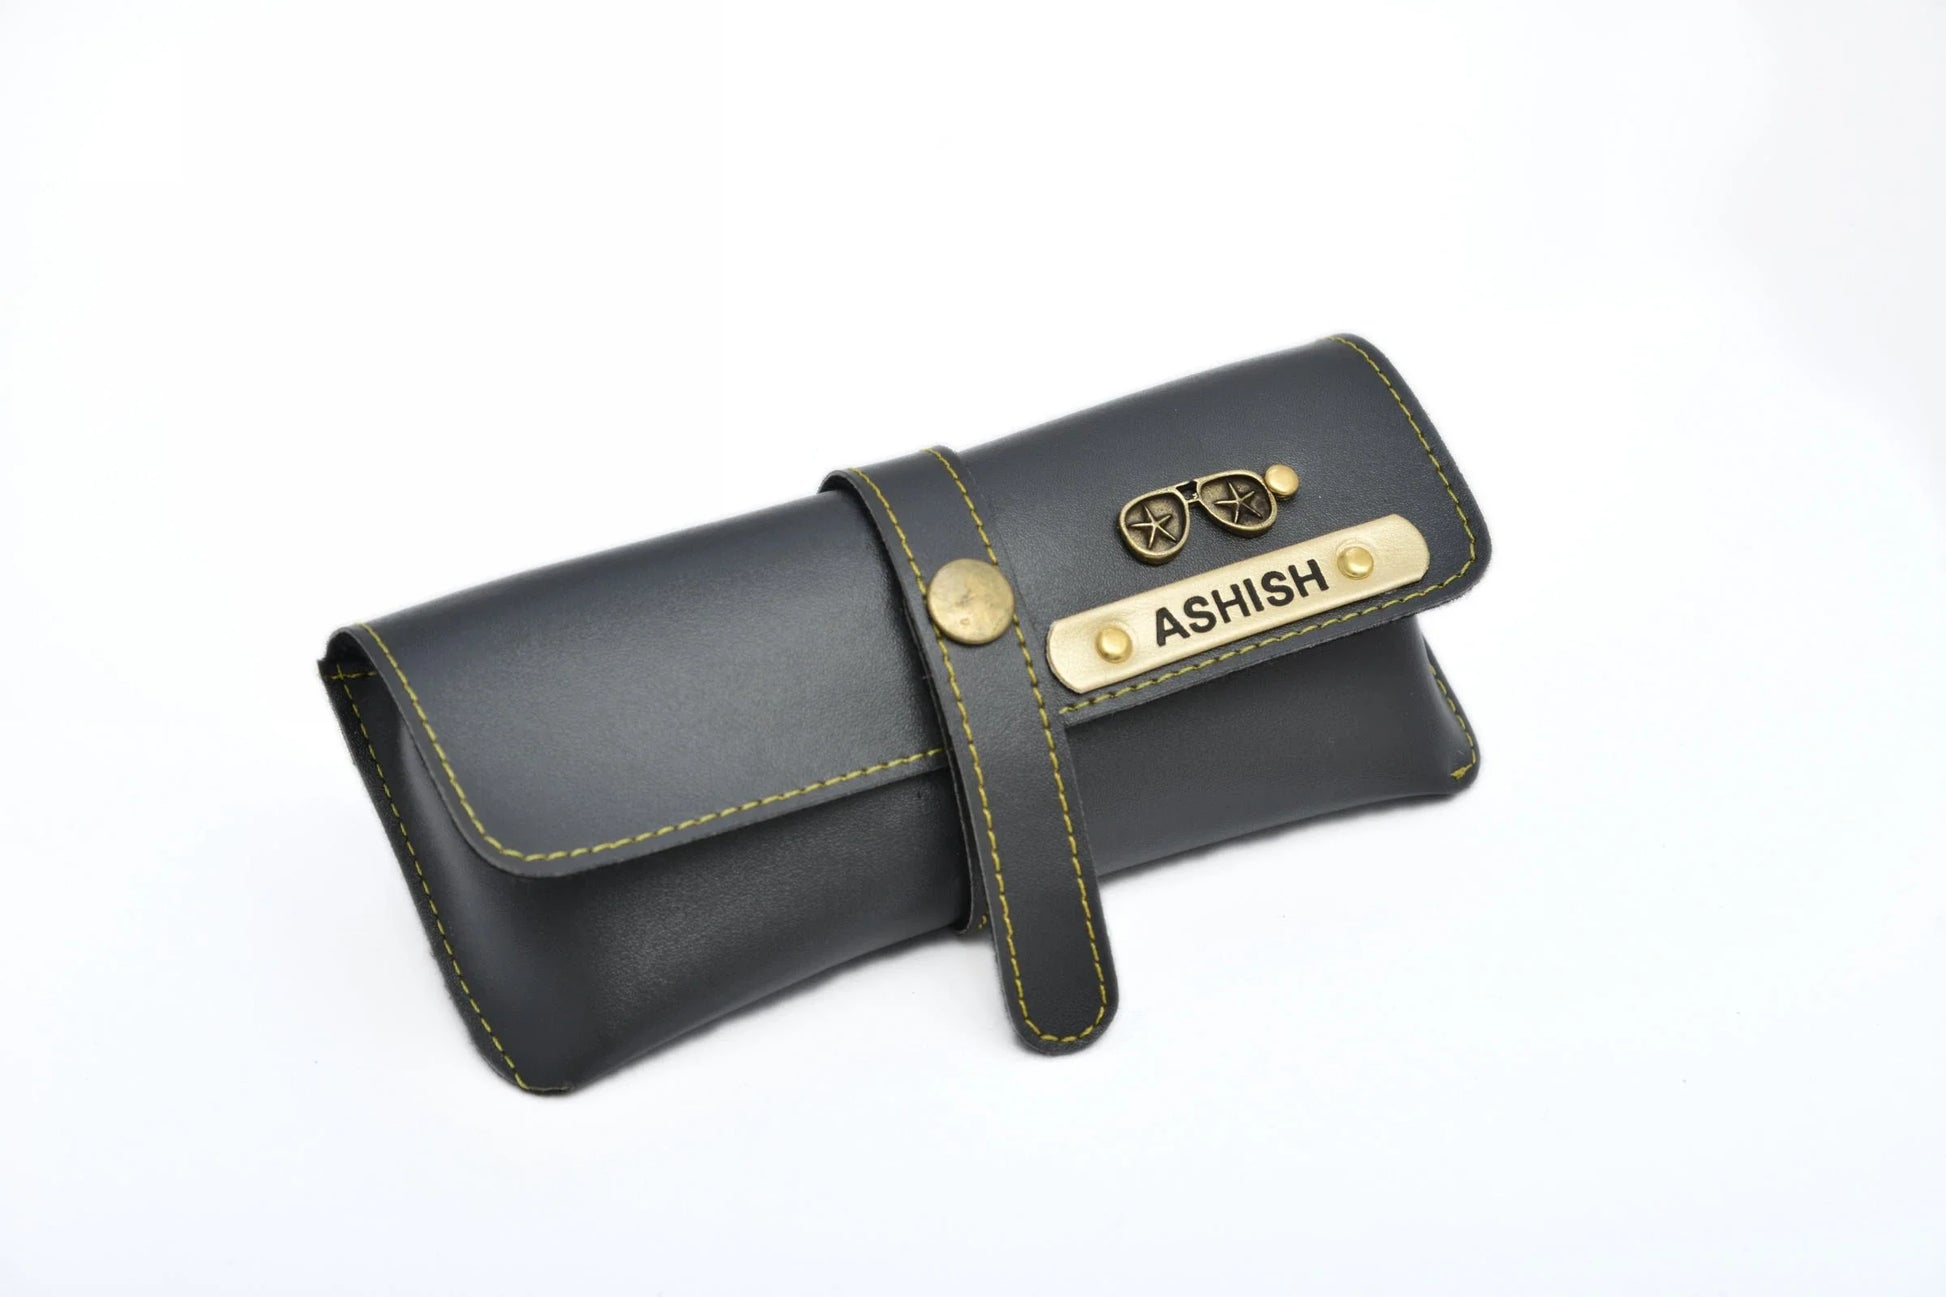 Our hard-shell eyewear case offers superior protection against accidental drops and impacts.